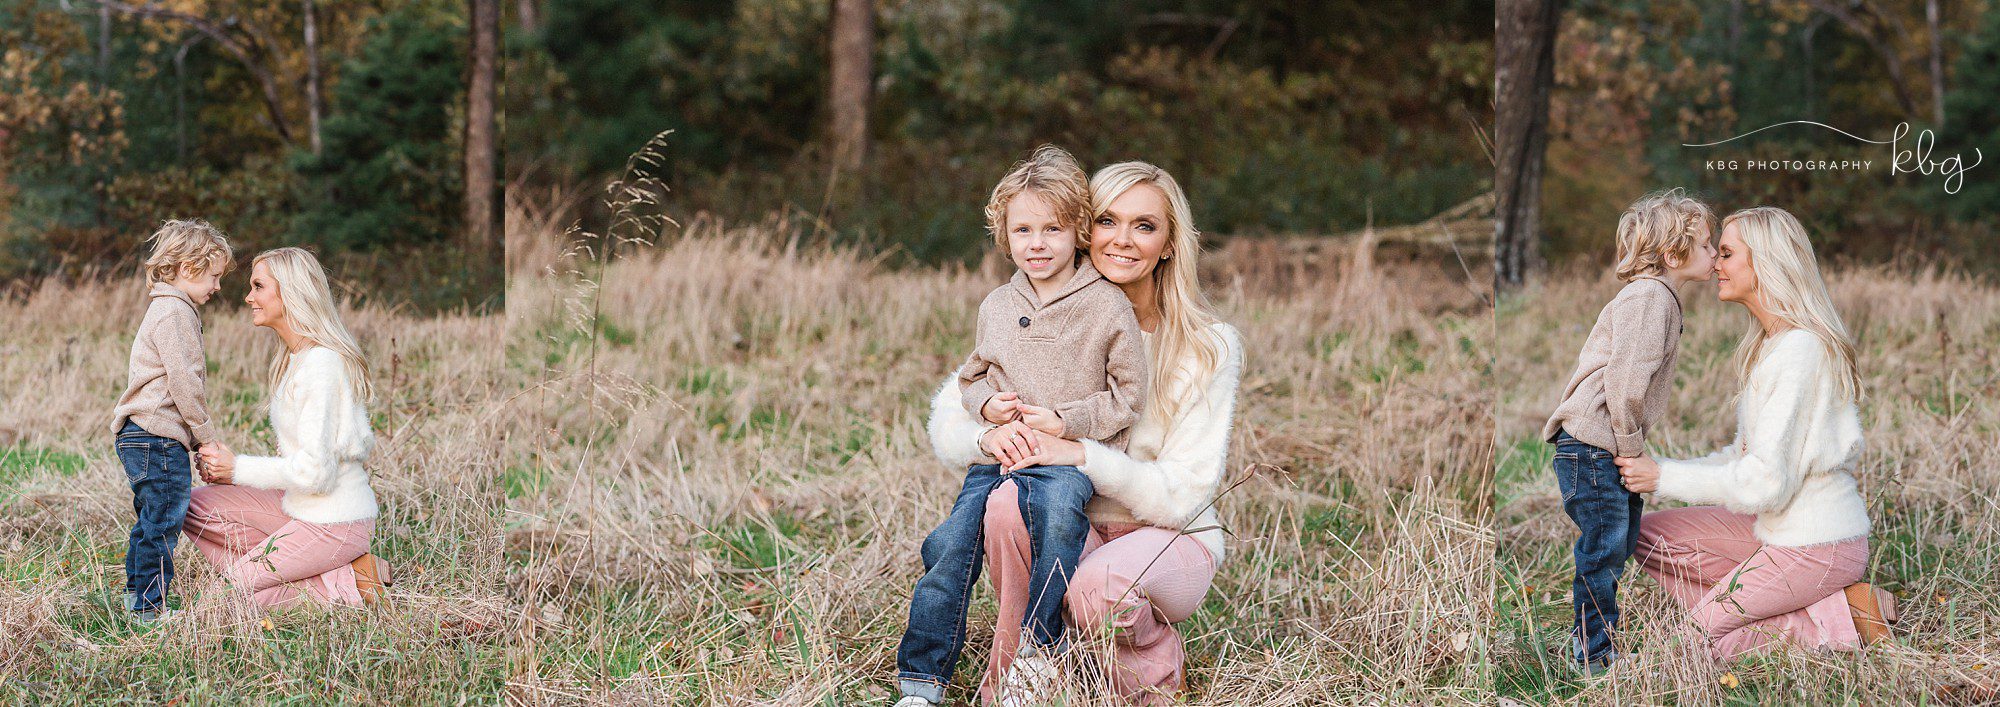 mother and son posing together - kennesaw family photographer